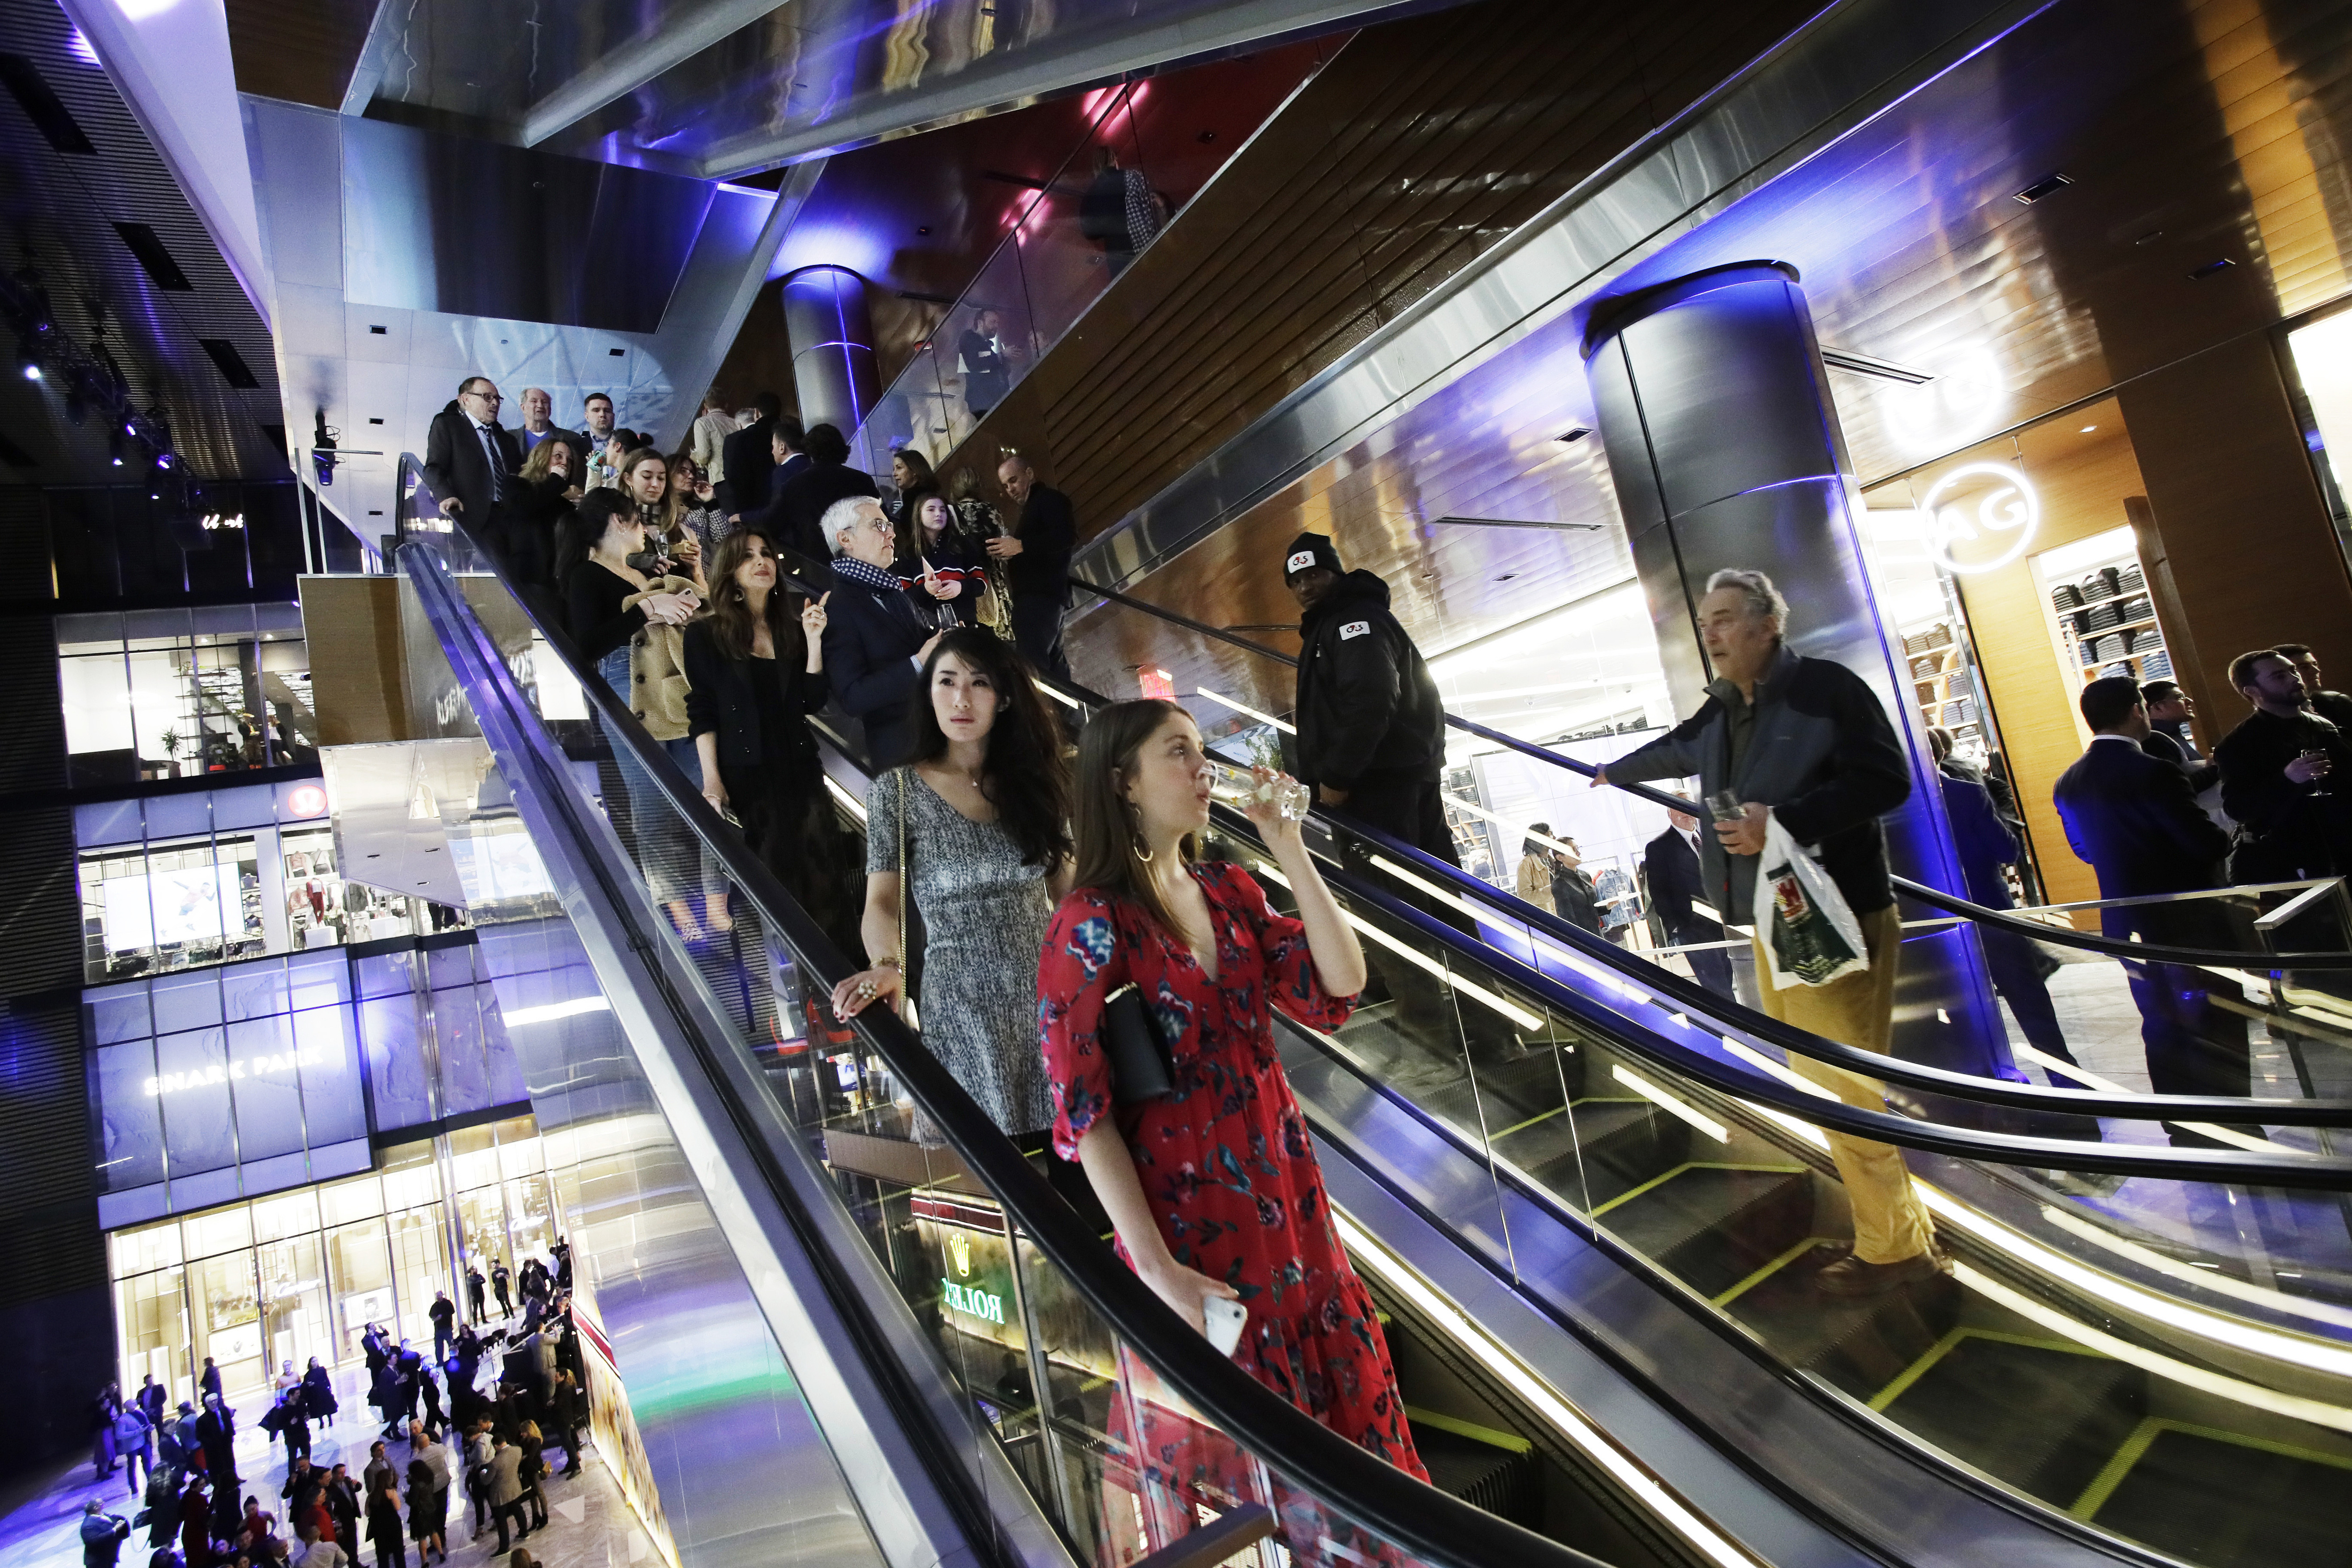 People attend the opening night of The Shops & Restaurants at Hudson Yards, Thursday, March 14, 2019, in New York. Hudson Yards, a $25 billion urban complex on Manhattan's west side, is the city's most ambitious development since the rebuilding of the World Trade Center. When fully complete, the 28-acre site will include 16 towers of homes and offices, a hotel, a school, the highest outdoor observation deck in the Western Hemisphere, a performing arts center and the shopping mall. (AP Photo/Mark Lennihan)